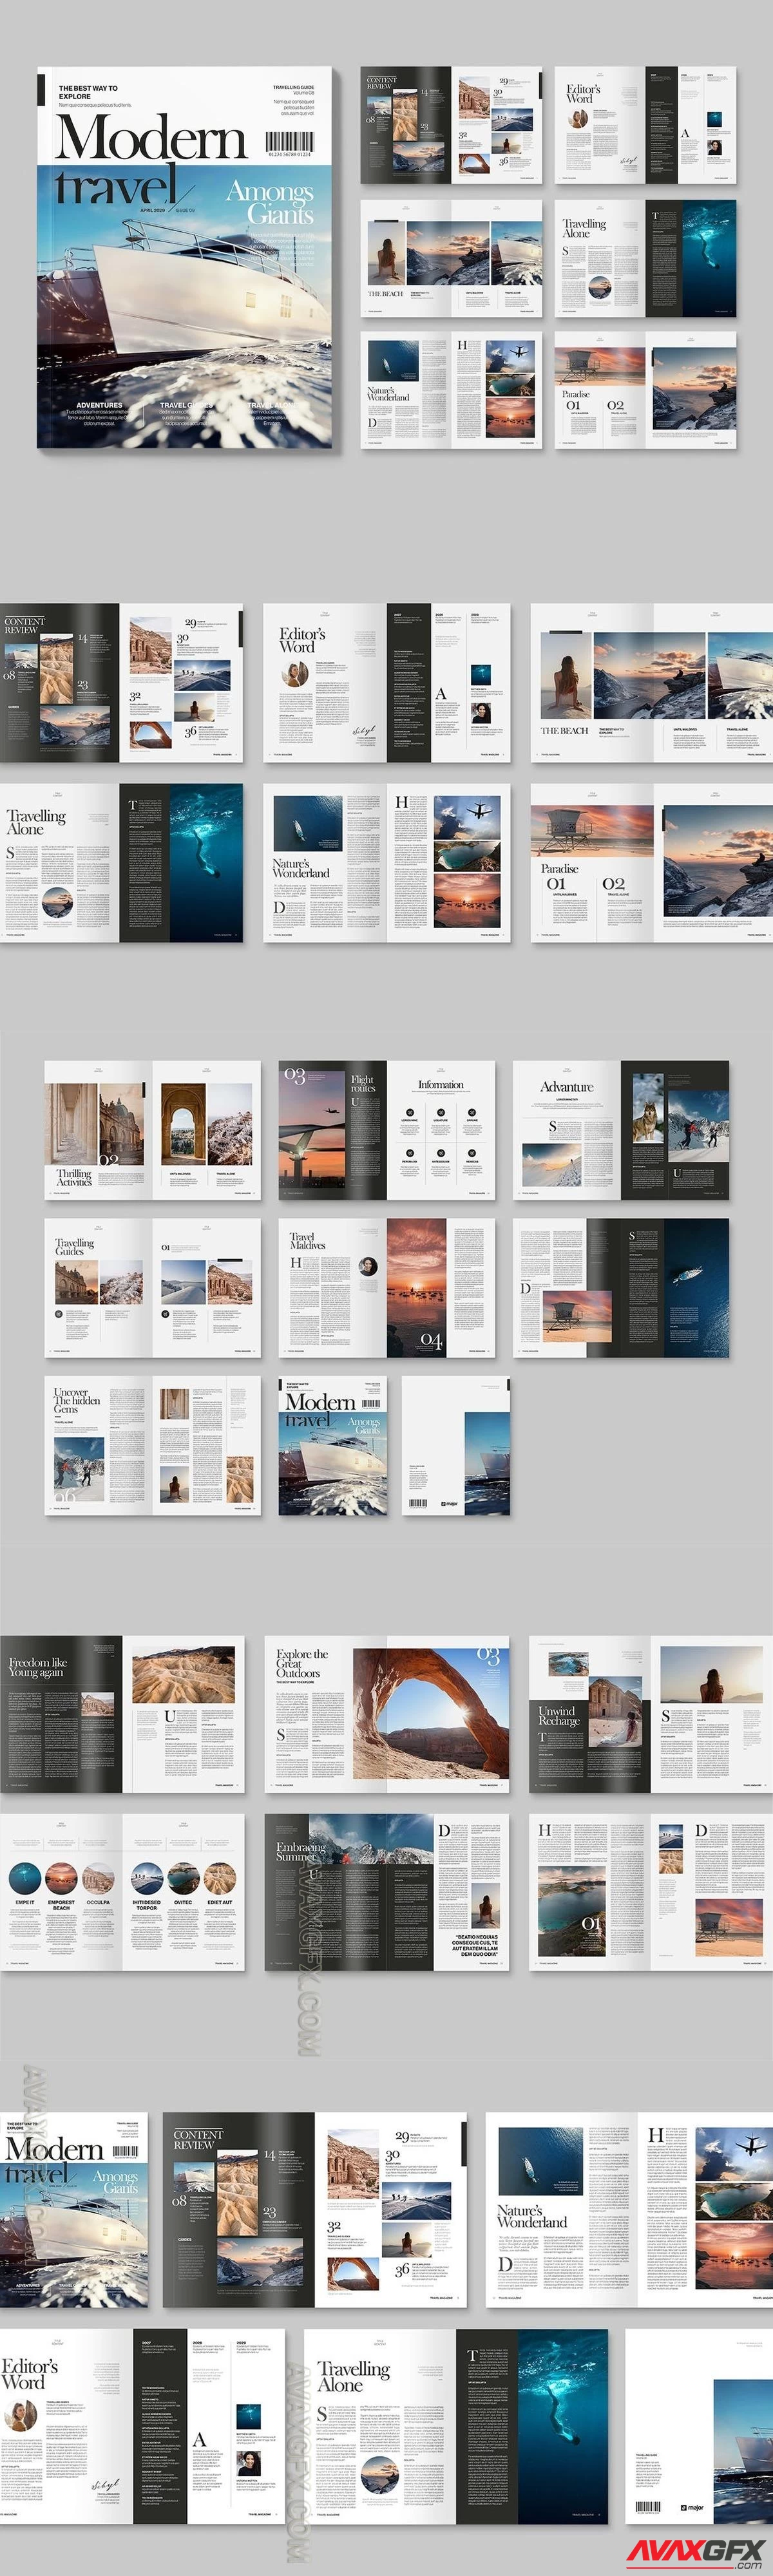 Travel Magazine Template HLRJ5PN [INDD]